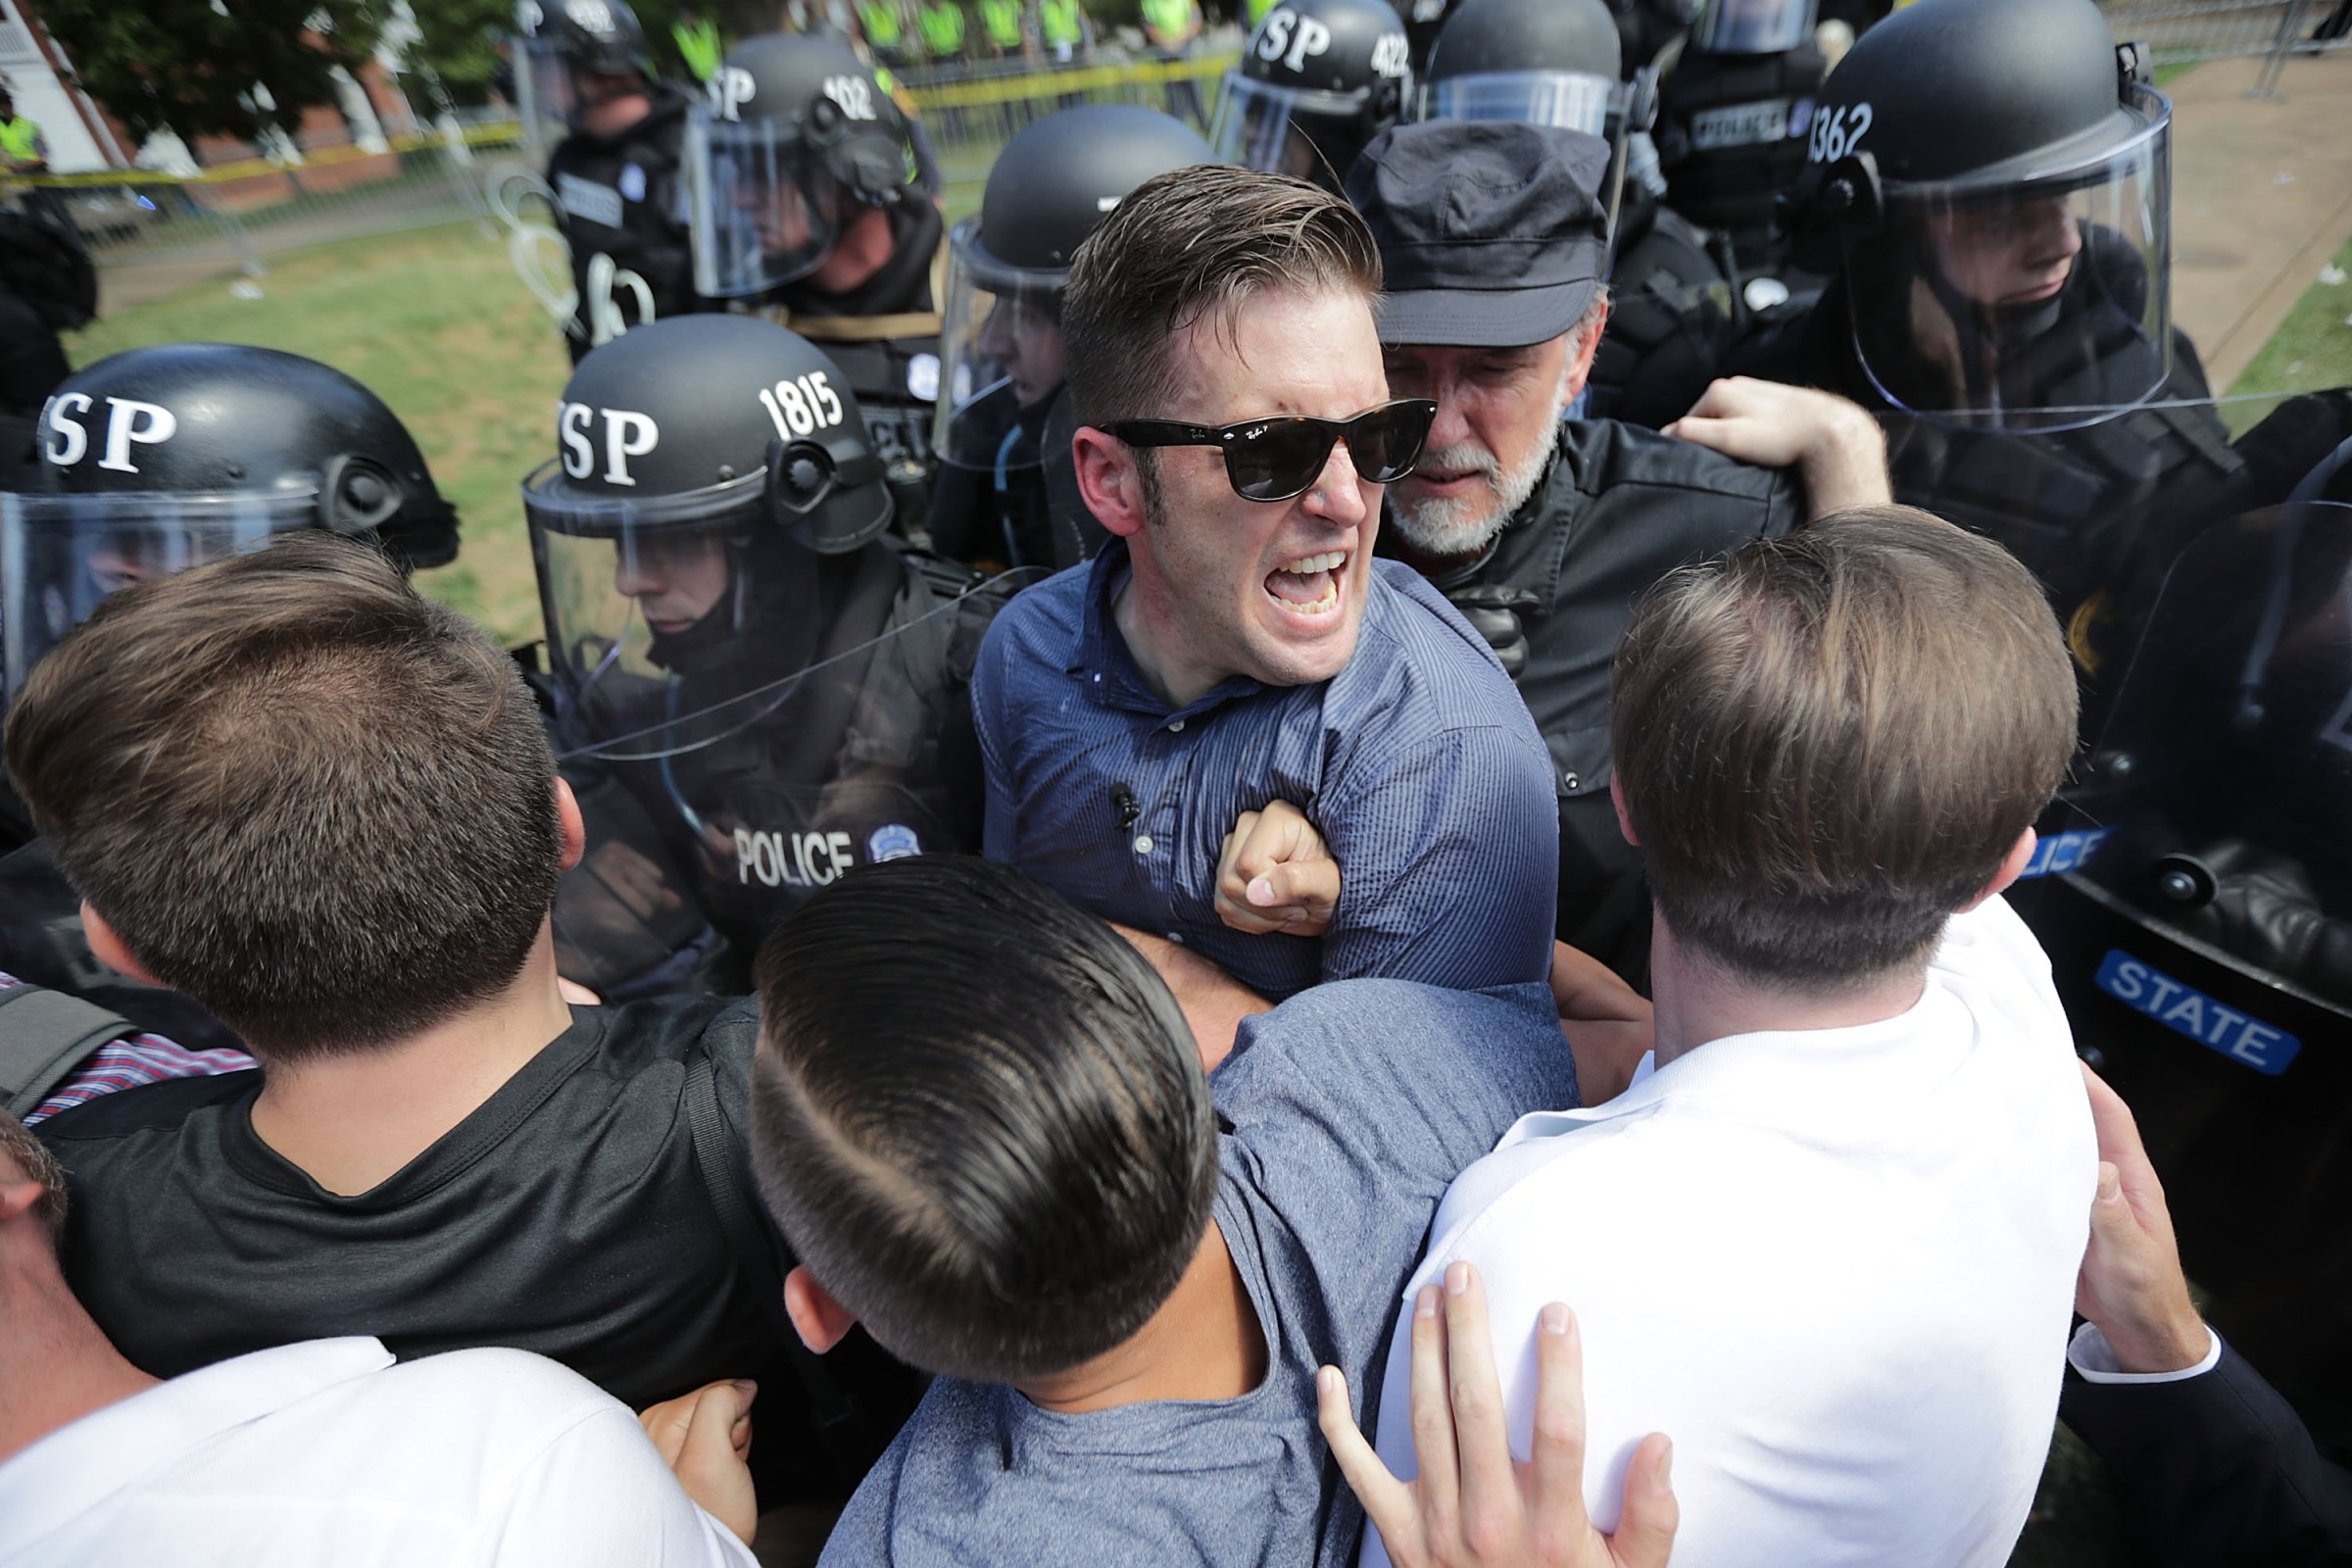 Violent Clashes Erupt at "Unite The Right" Rally In Charlottesville